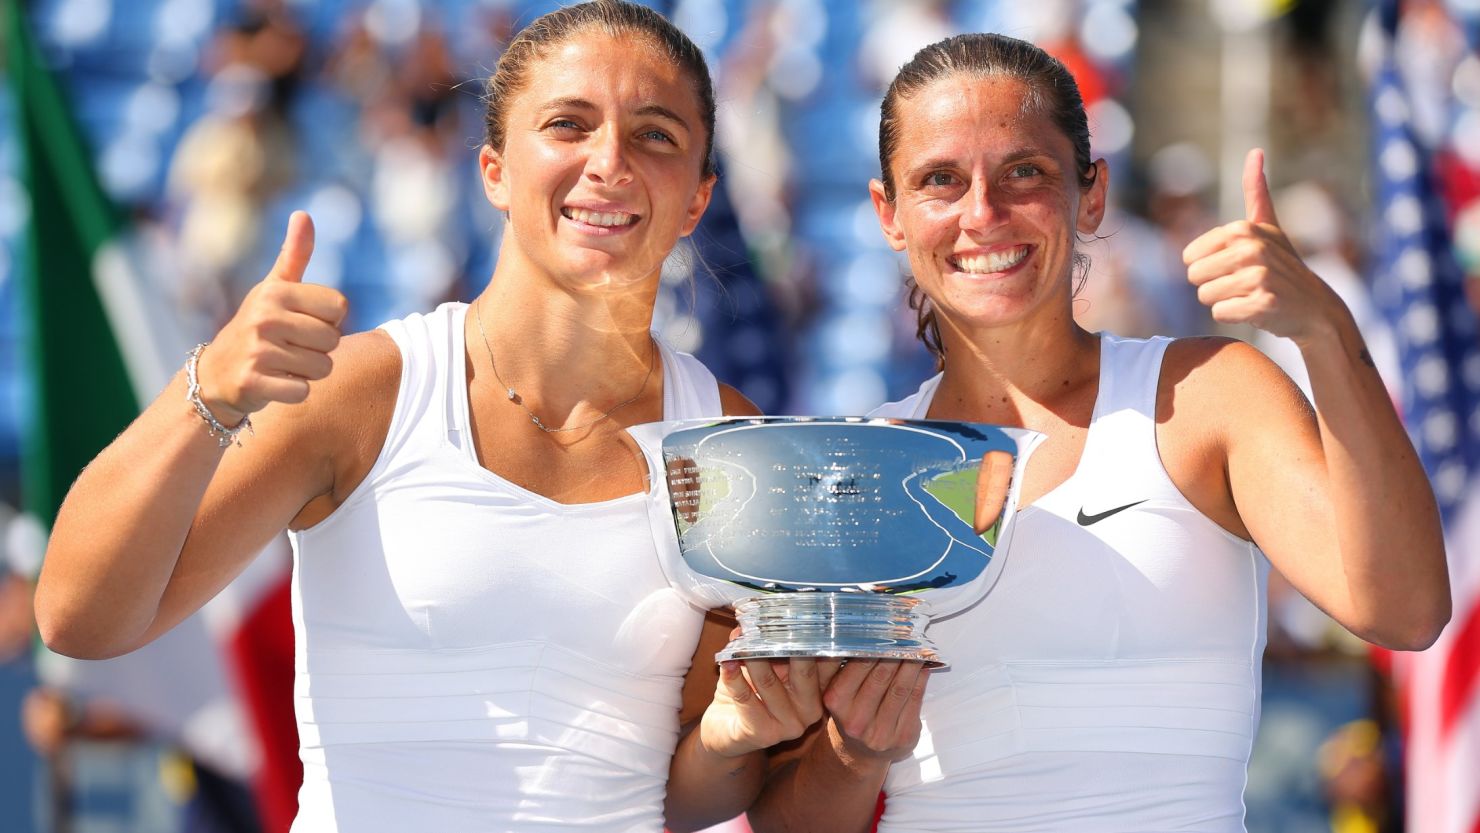 Sara Errani (L) and Roberta Vinci have won three grand slam doubles titles together as a duo